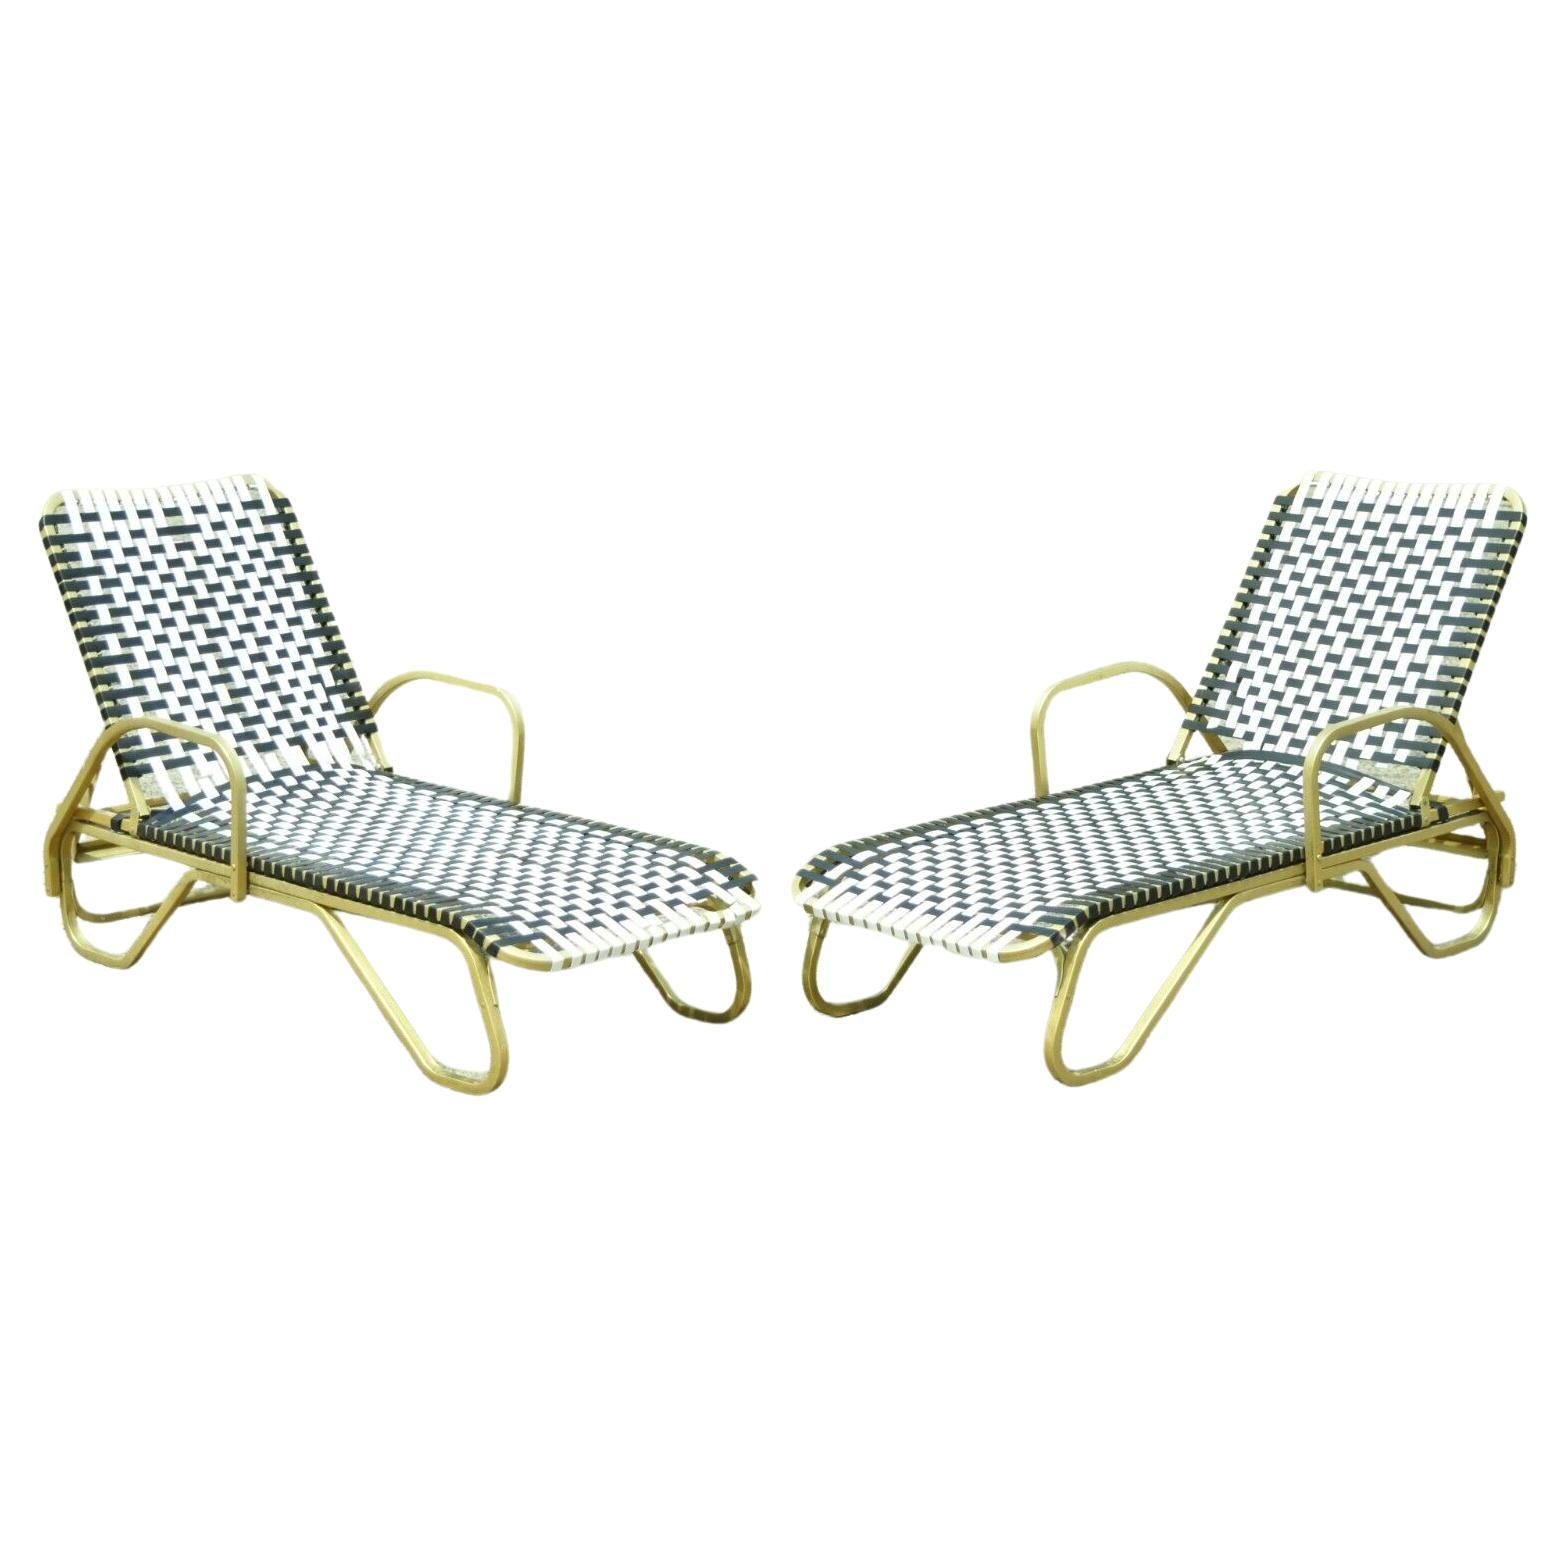 Hollywood Regency Vinyl Strap Aluminum Pool Patio Chaise Lounge Chairs, a Pair For Sale